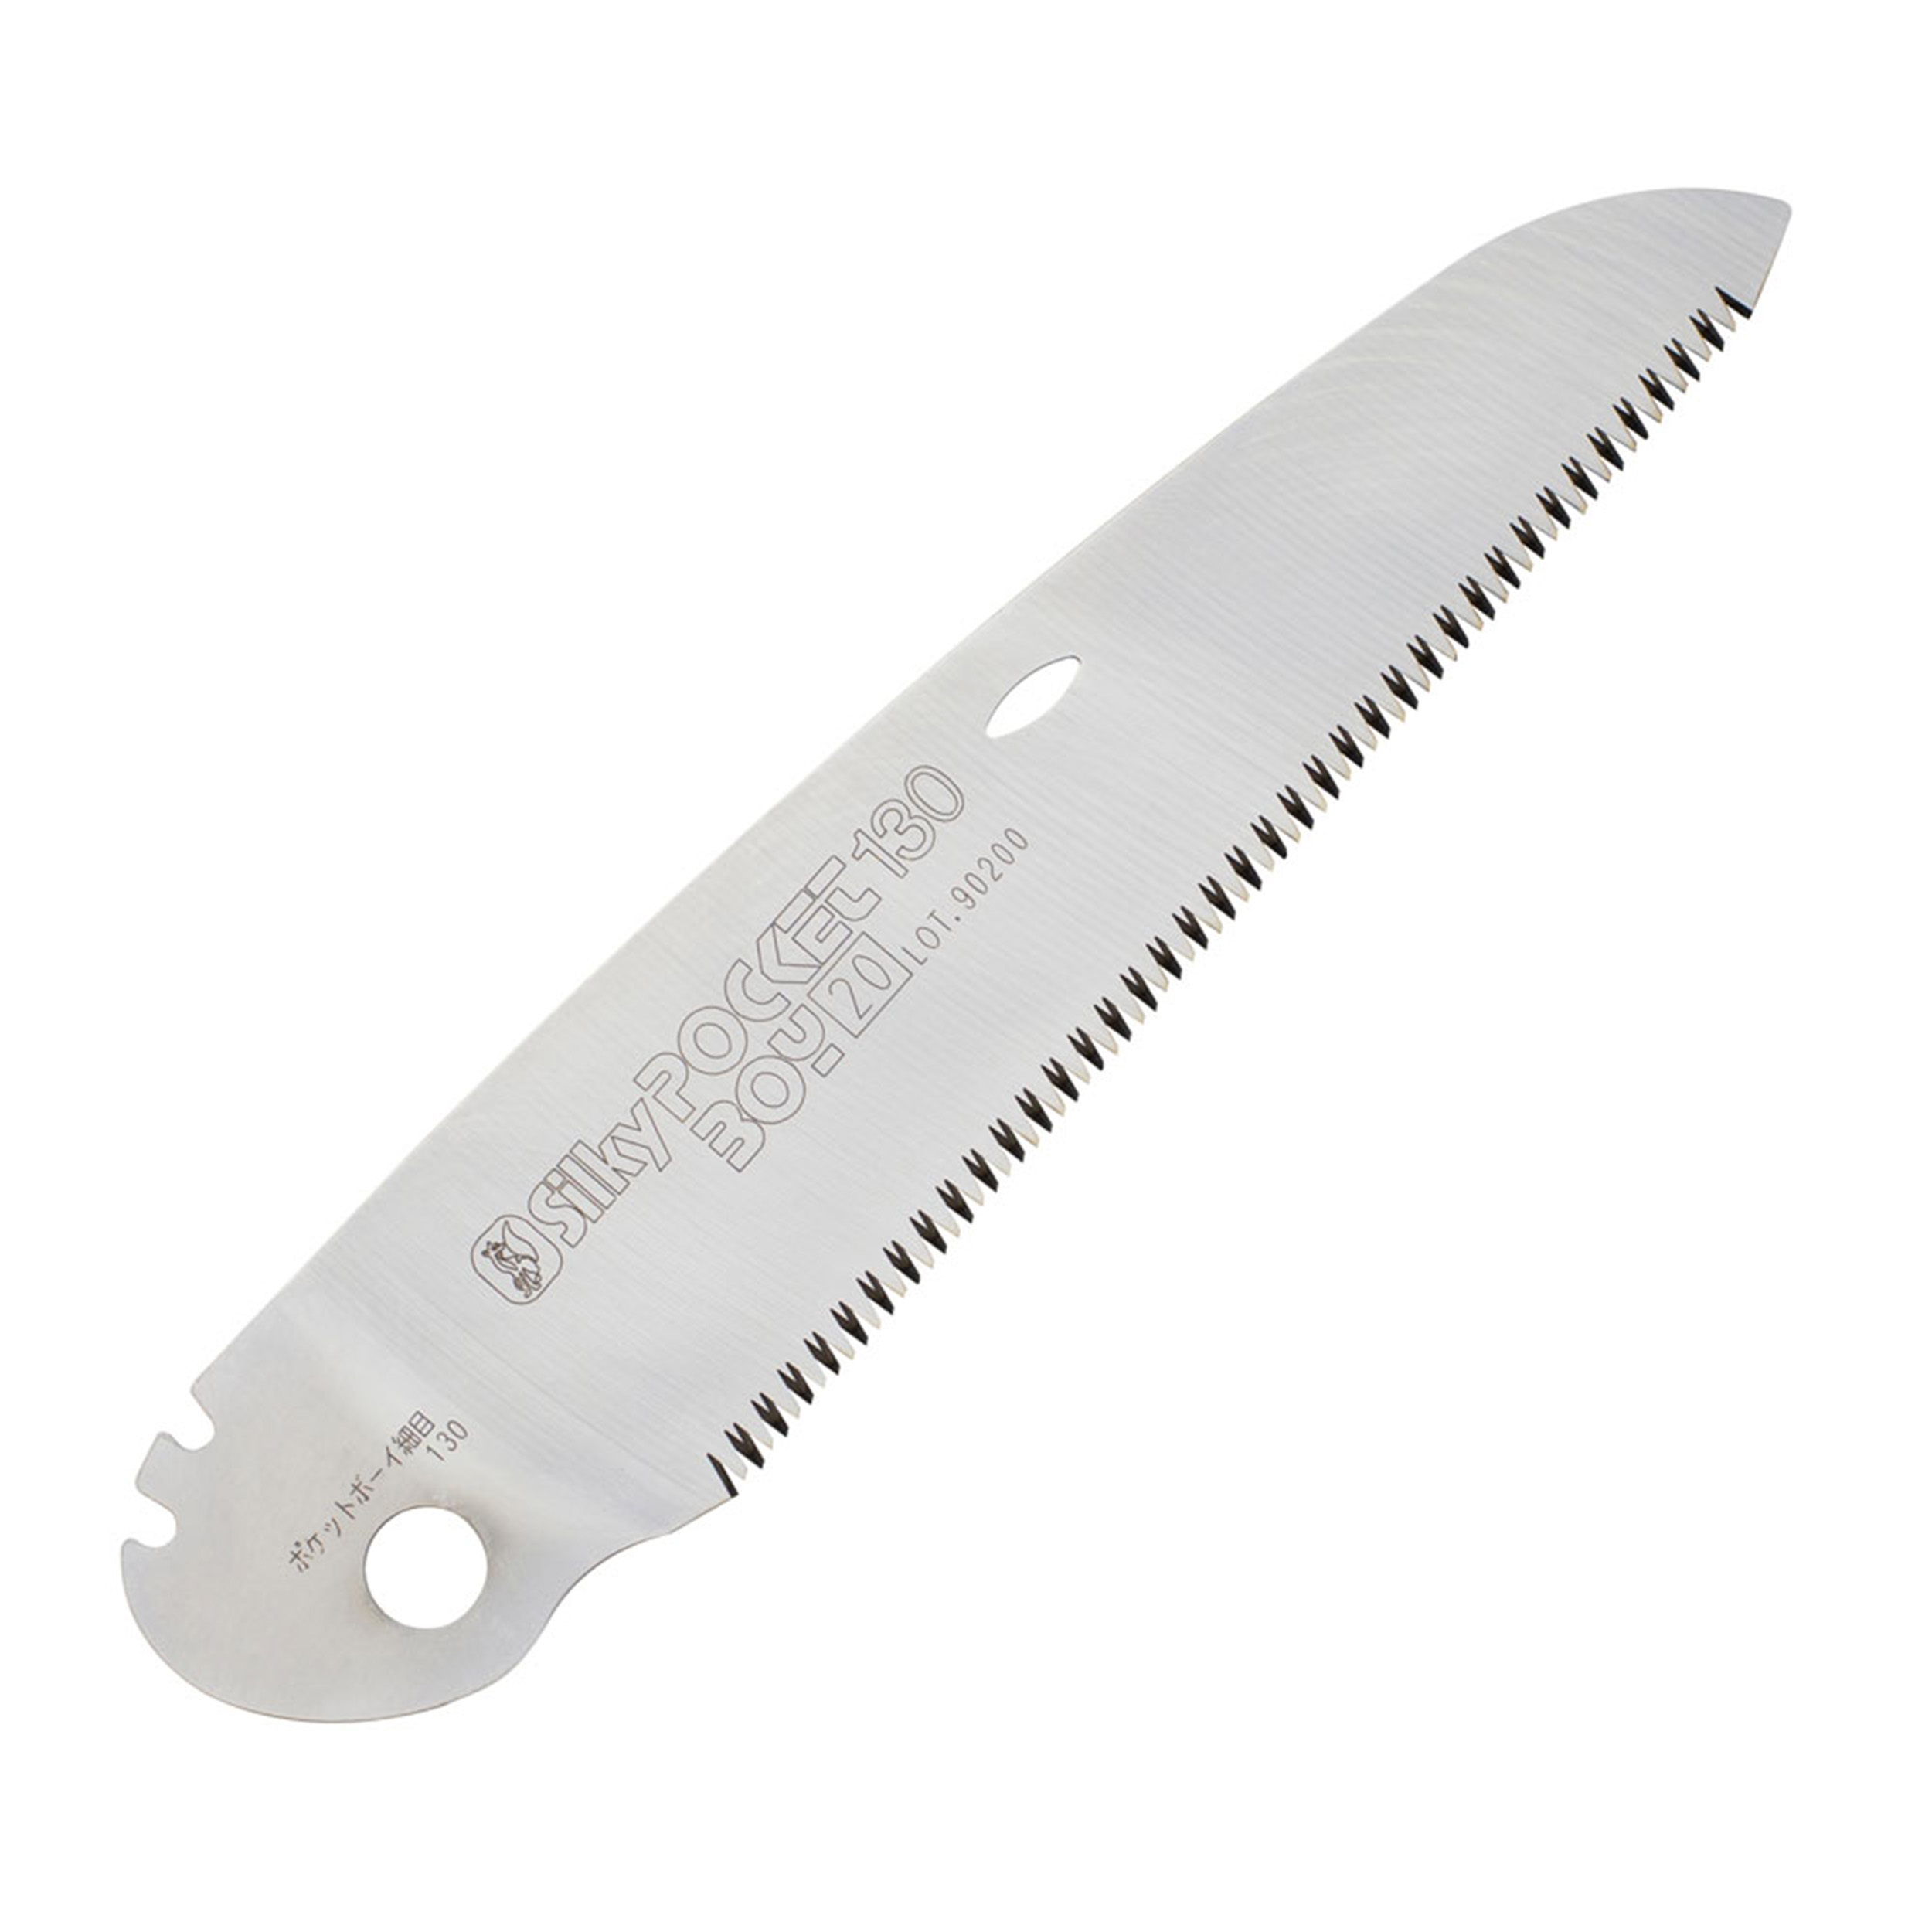 Pocketboy Replacement Blade, 130mm, Fine Teeth